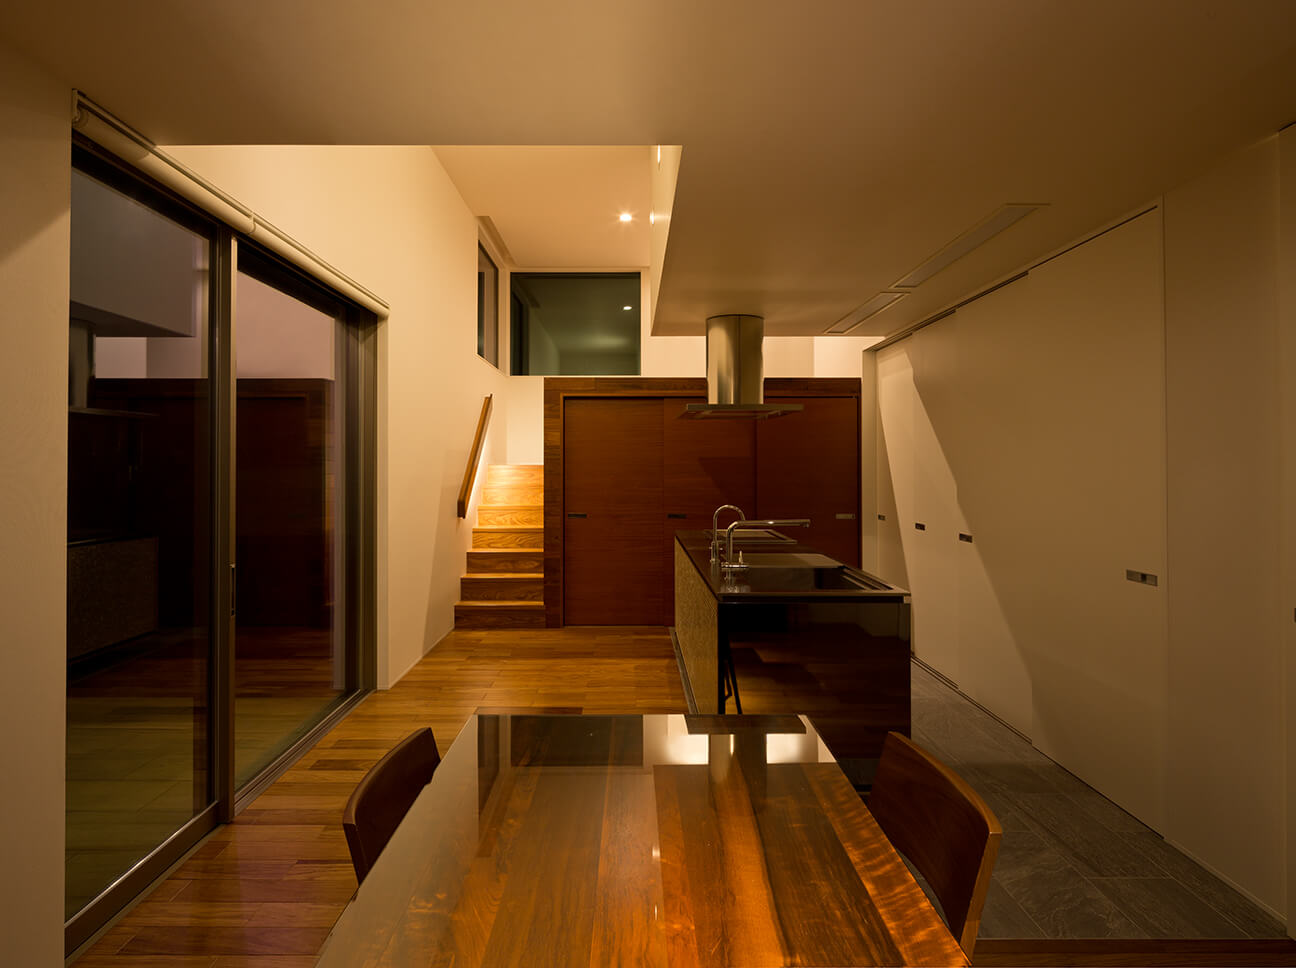 N8-house by Architect Show